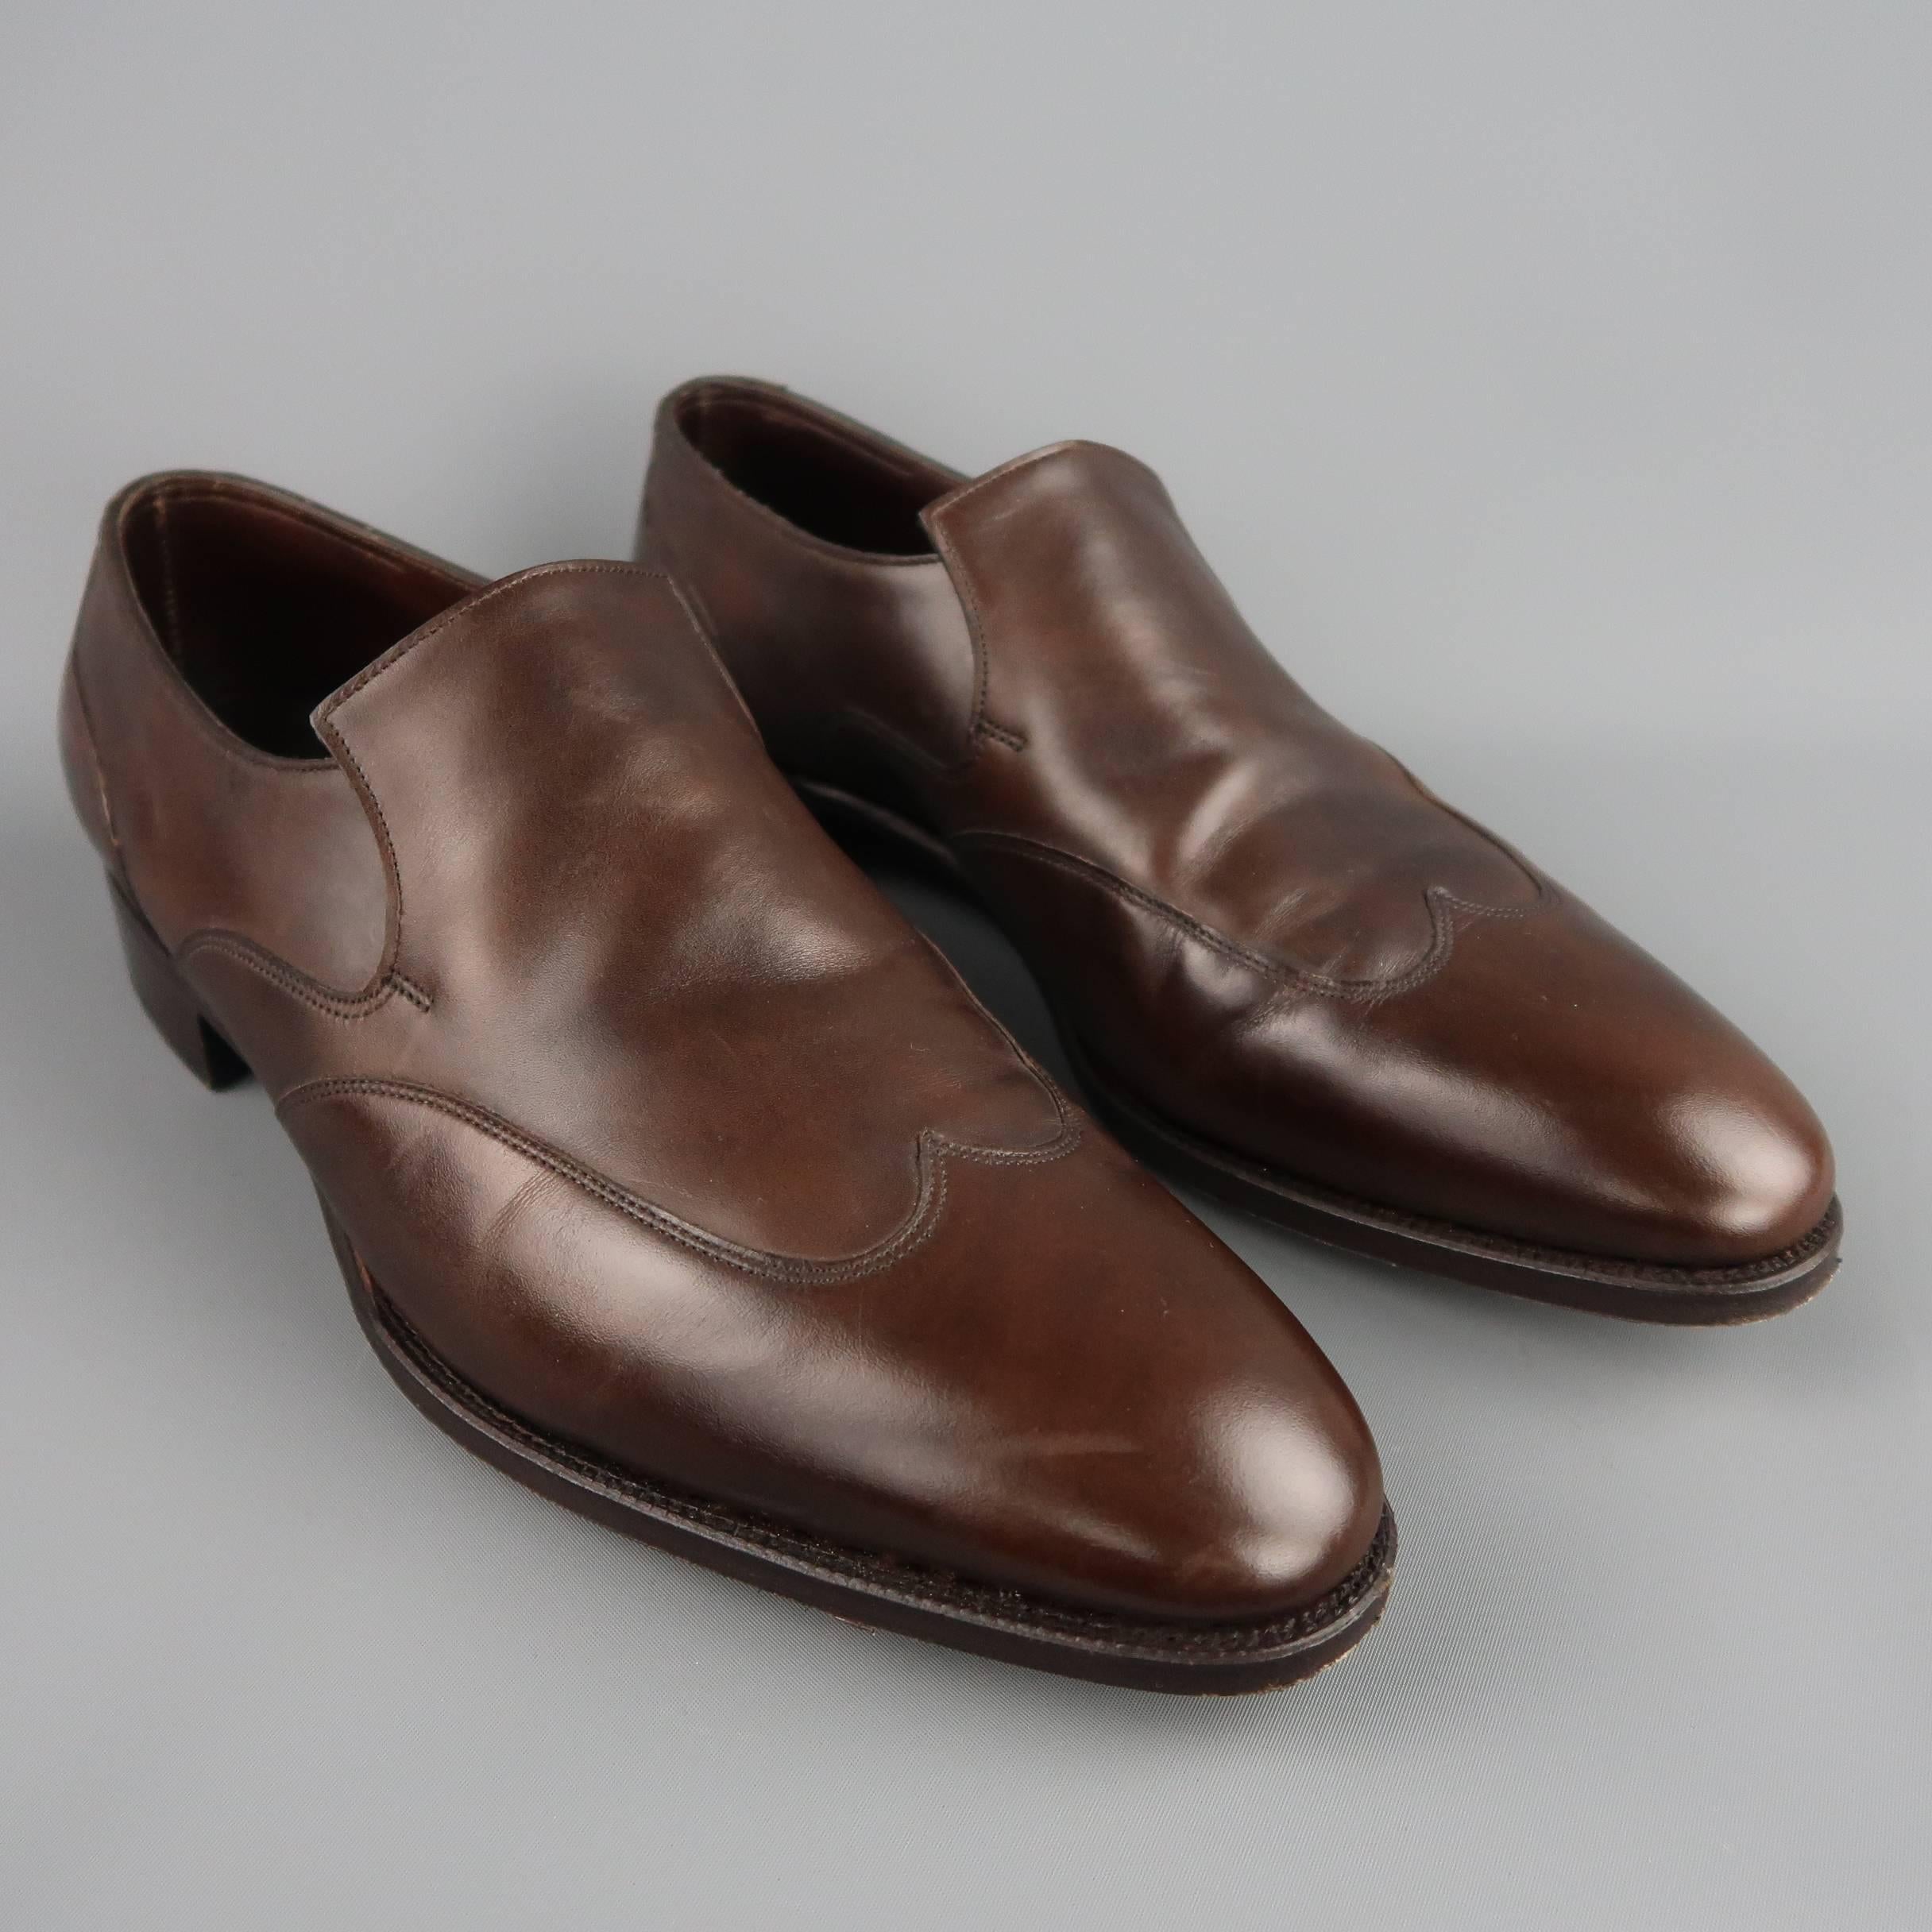 JOHN LOBB "WARWICK" dress loafers come in a rich brown smooth leather and feature a rounded point toe with wingtip. With box. Minor wear. Made in England.
 
Good Pre-Owned Condition. Retails: $1,849.00.
Marked: UK 9 (E1000)
 
Outsole: 12 x